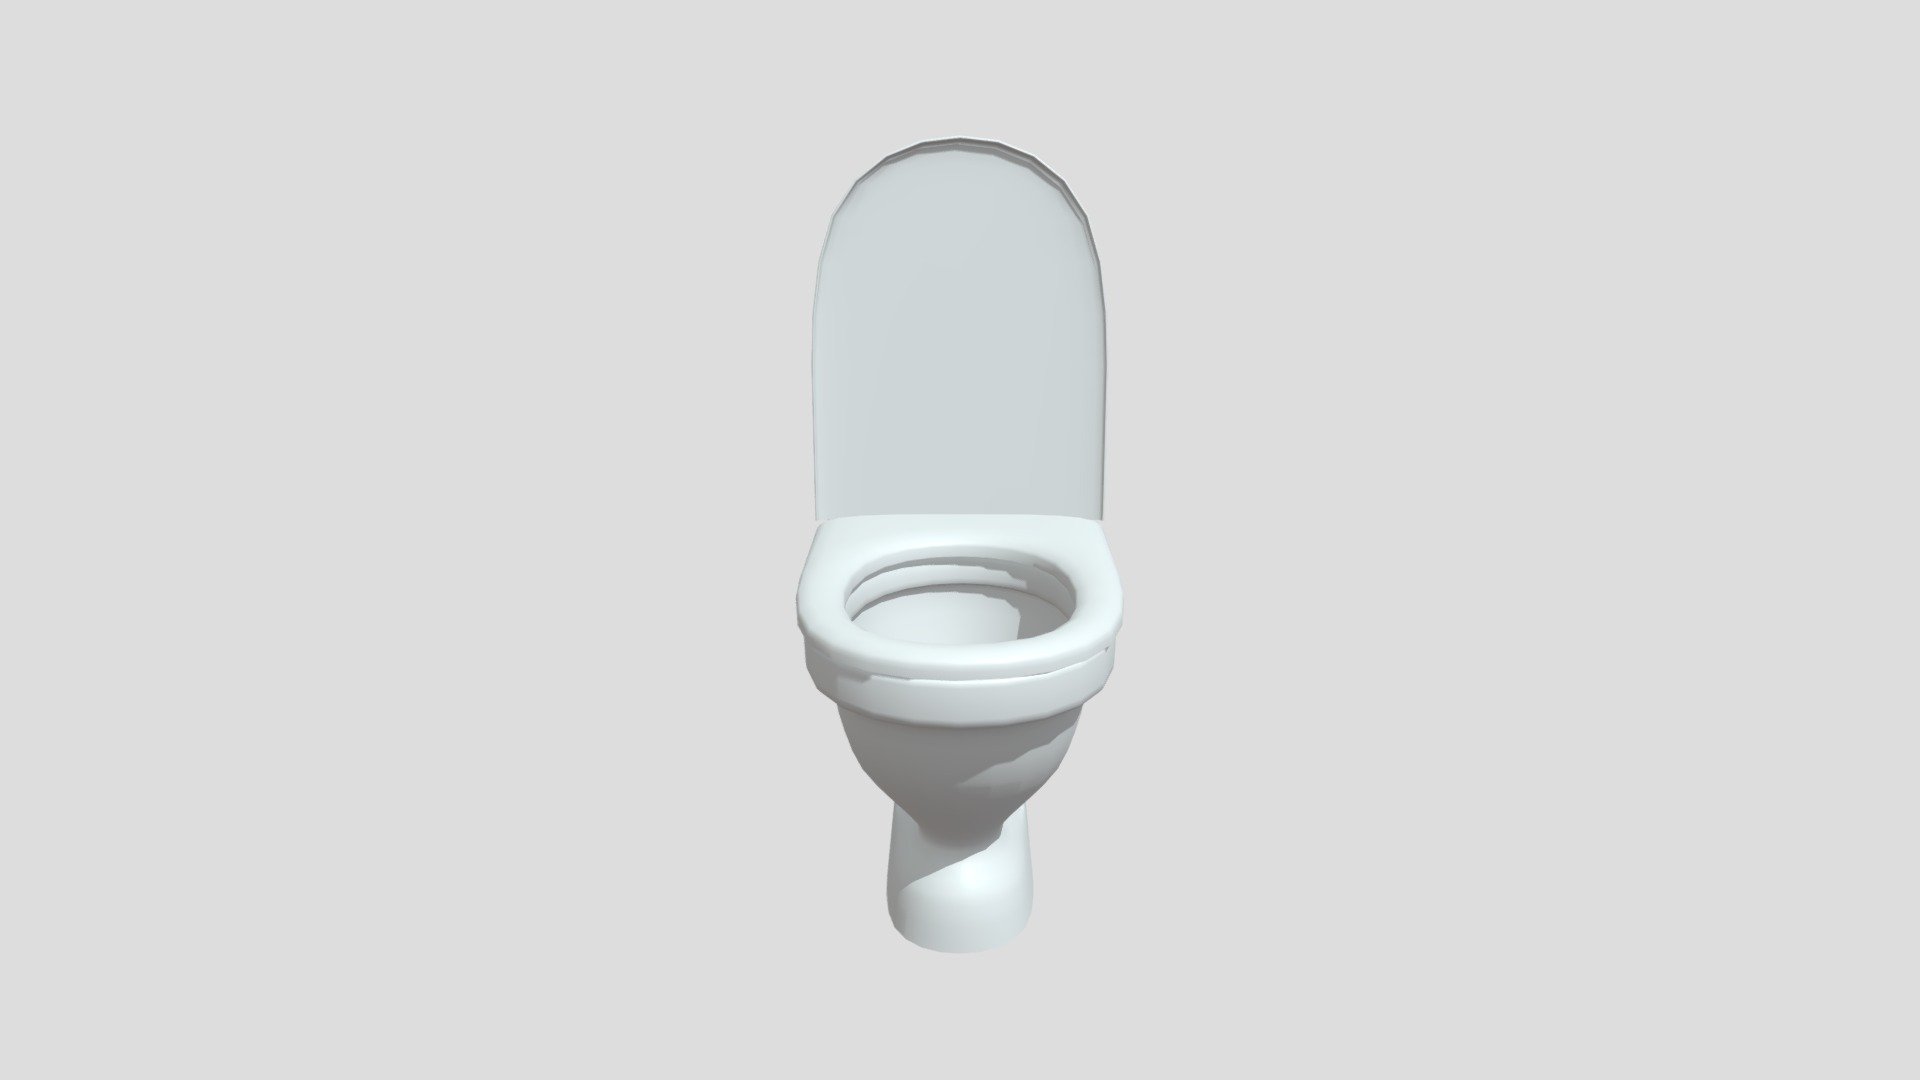 Skibidi Toilet Download Free 3d Model By Cameraman Wannoischool01